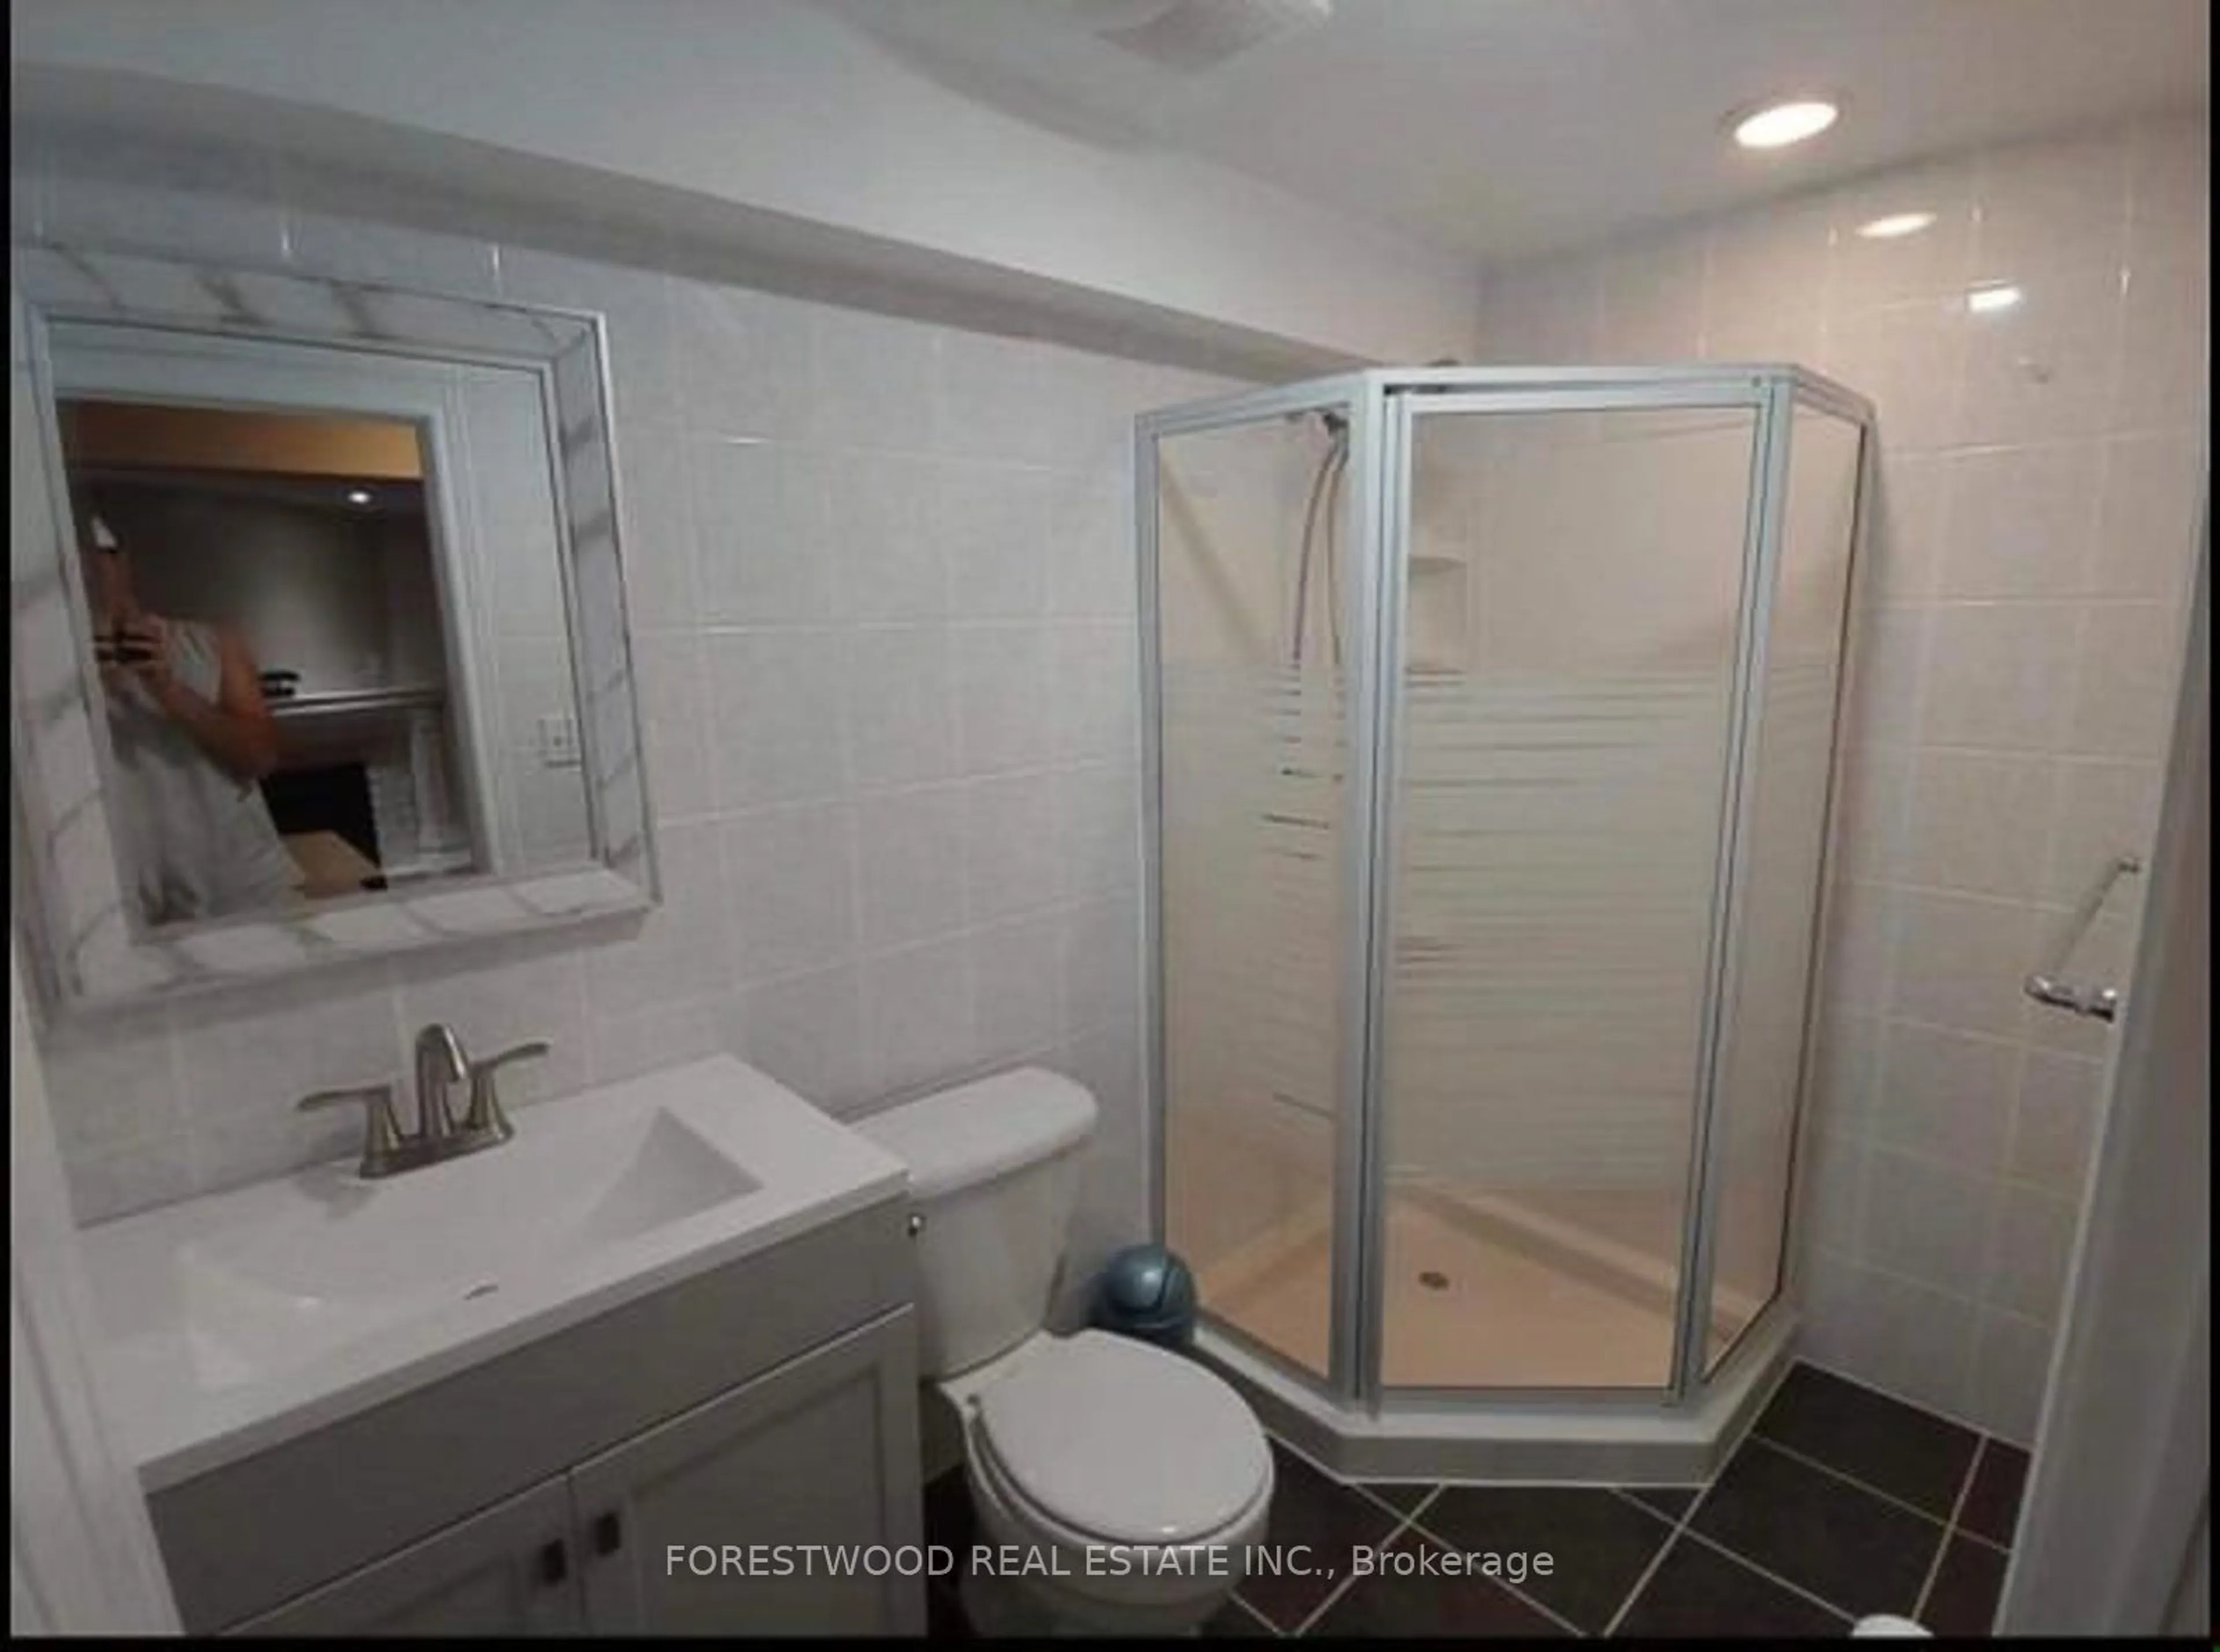 Standard bathroom for 3310 Ivernia Rd, Mississauga Ontario L4Y 3E8